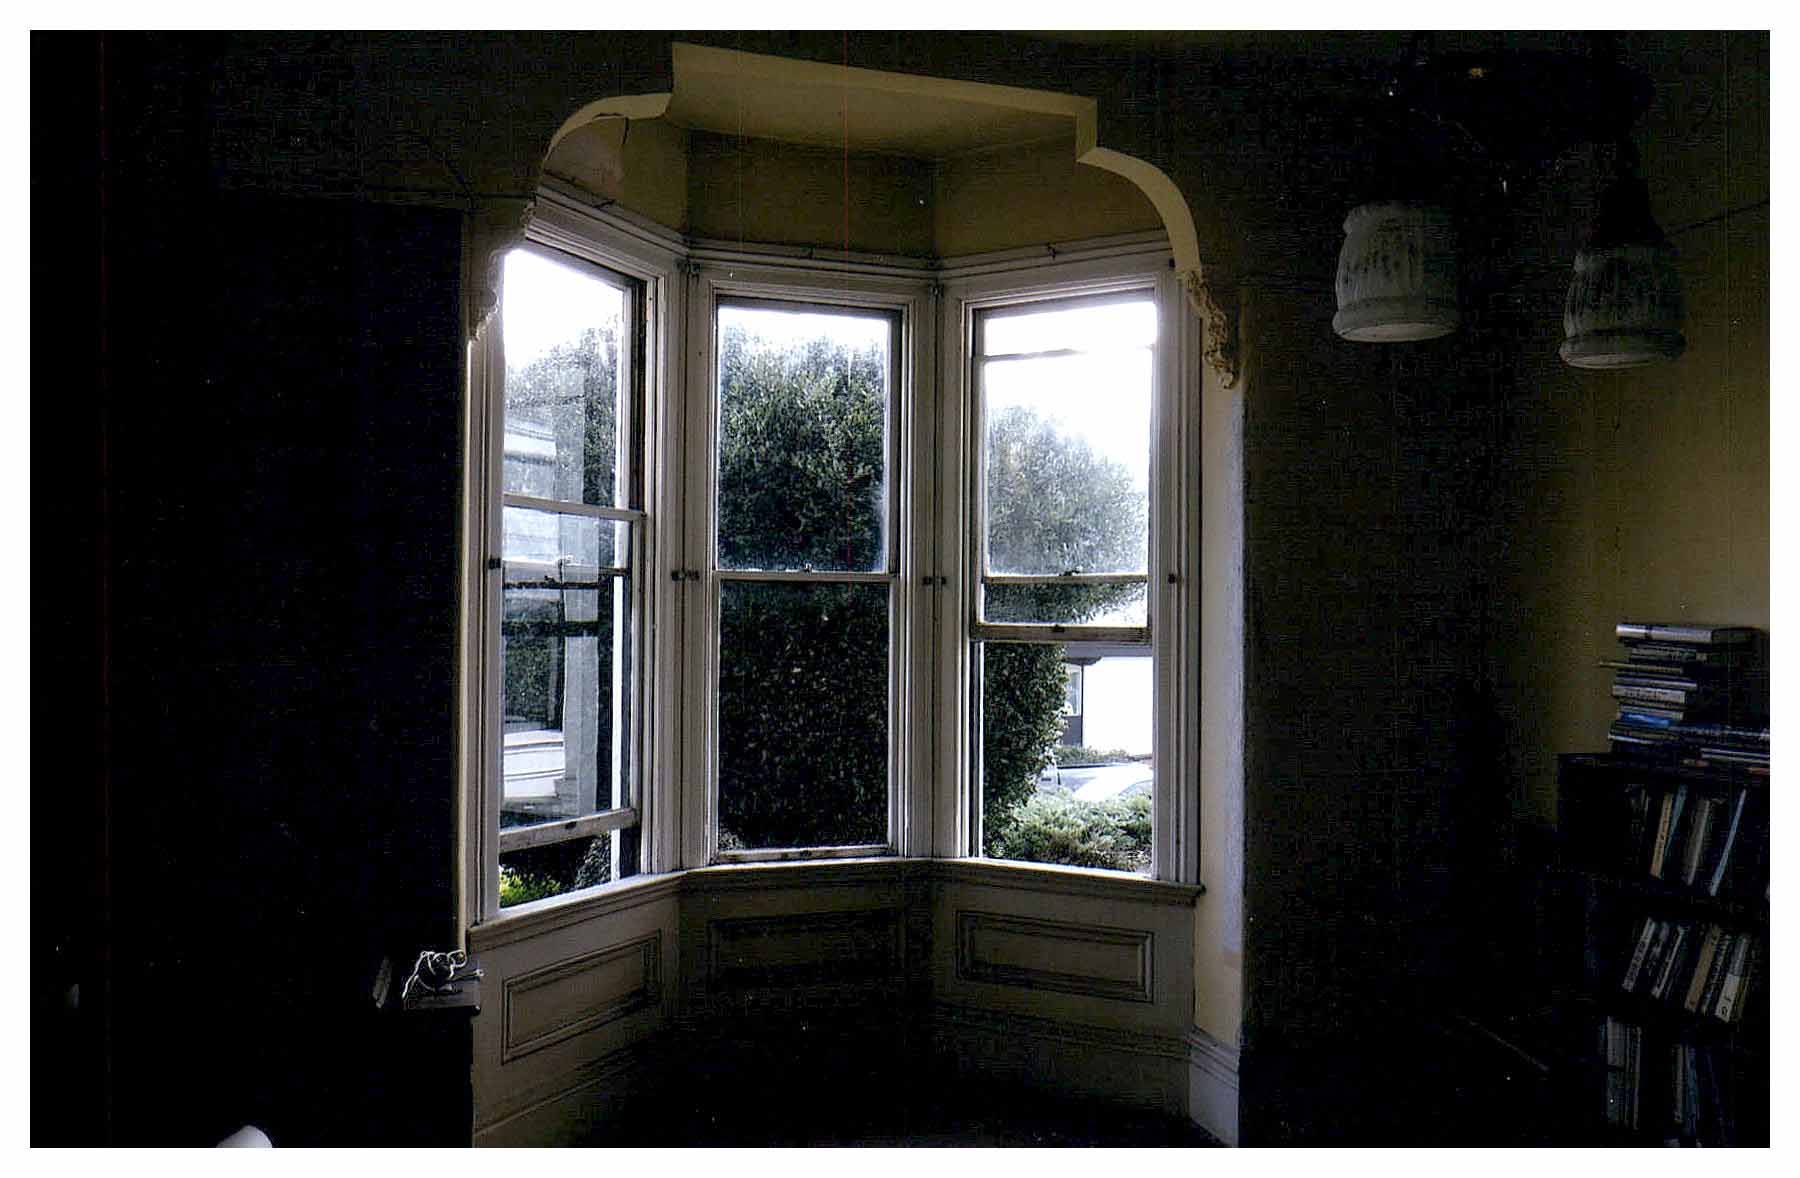 Before: same view of bay windows in alcove with the prior dark-colored walls.